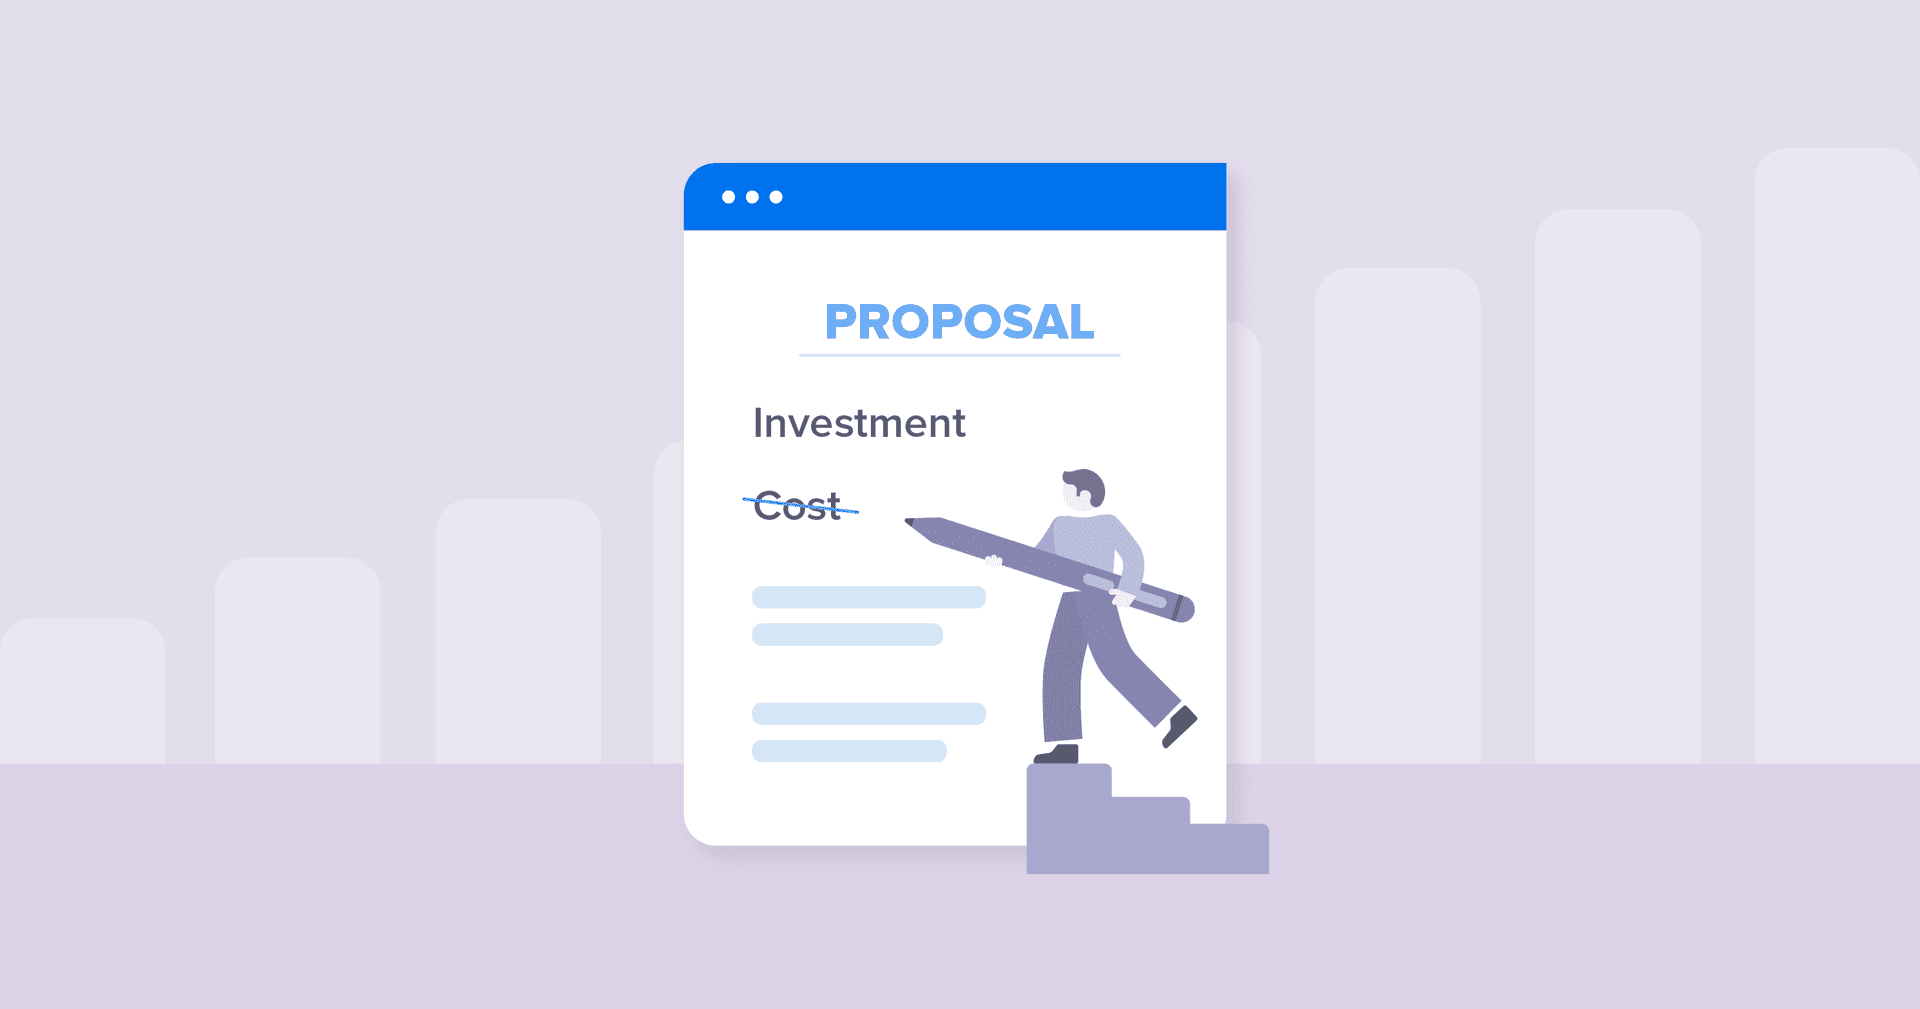 How to Seal the Deal With a Powerful Client Proposal